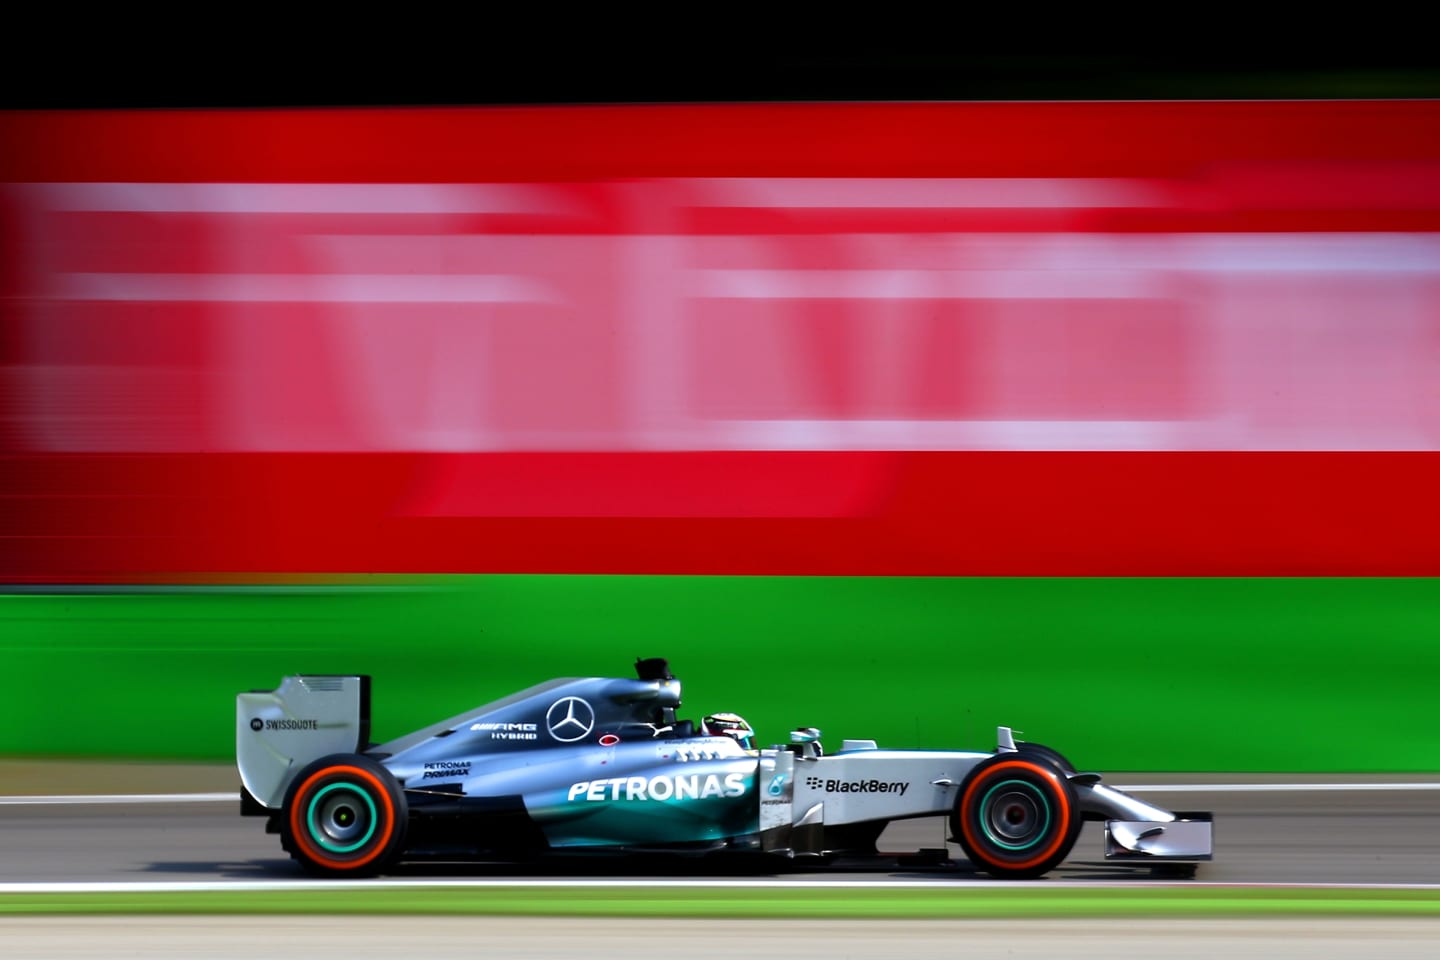 2014: The Mercedes W05 ushered in not only a new era of F1, but a new era of dominance as Mercedes took 16 wins, 701 points and Hamilton clinched his second drivers' championship. Livery-wise, the team employed a darker silver colour at the back of the car on the engine cover.